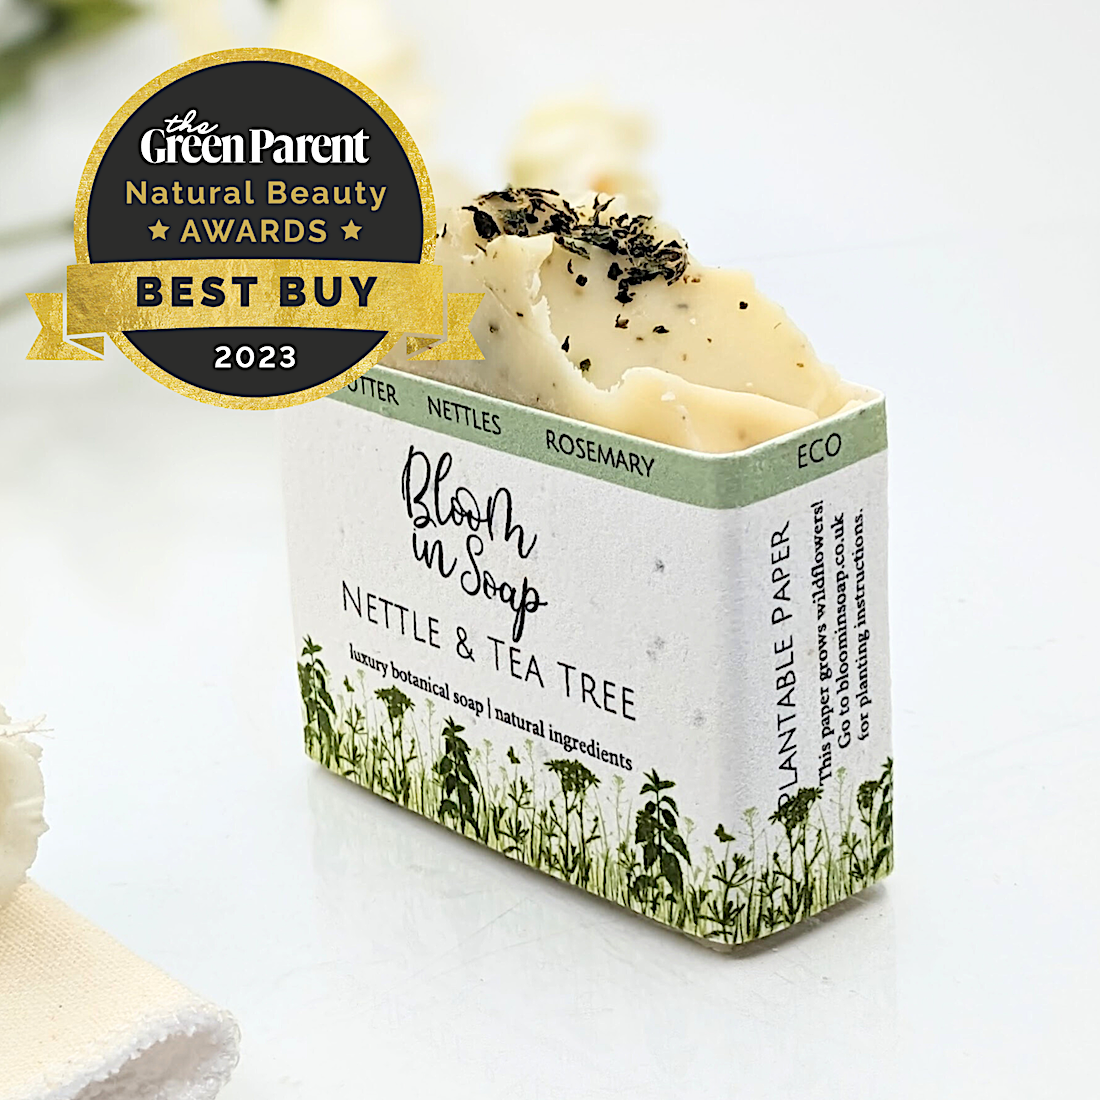 Award winning bar soap with tea tree oil from Bloom In Soap